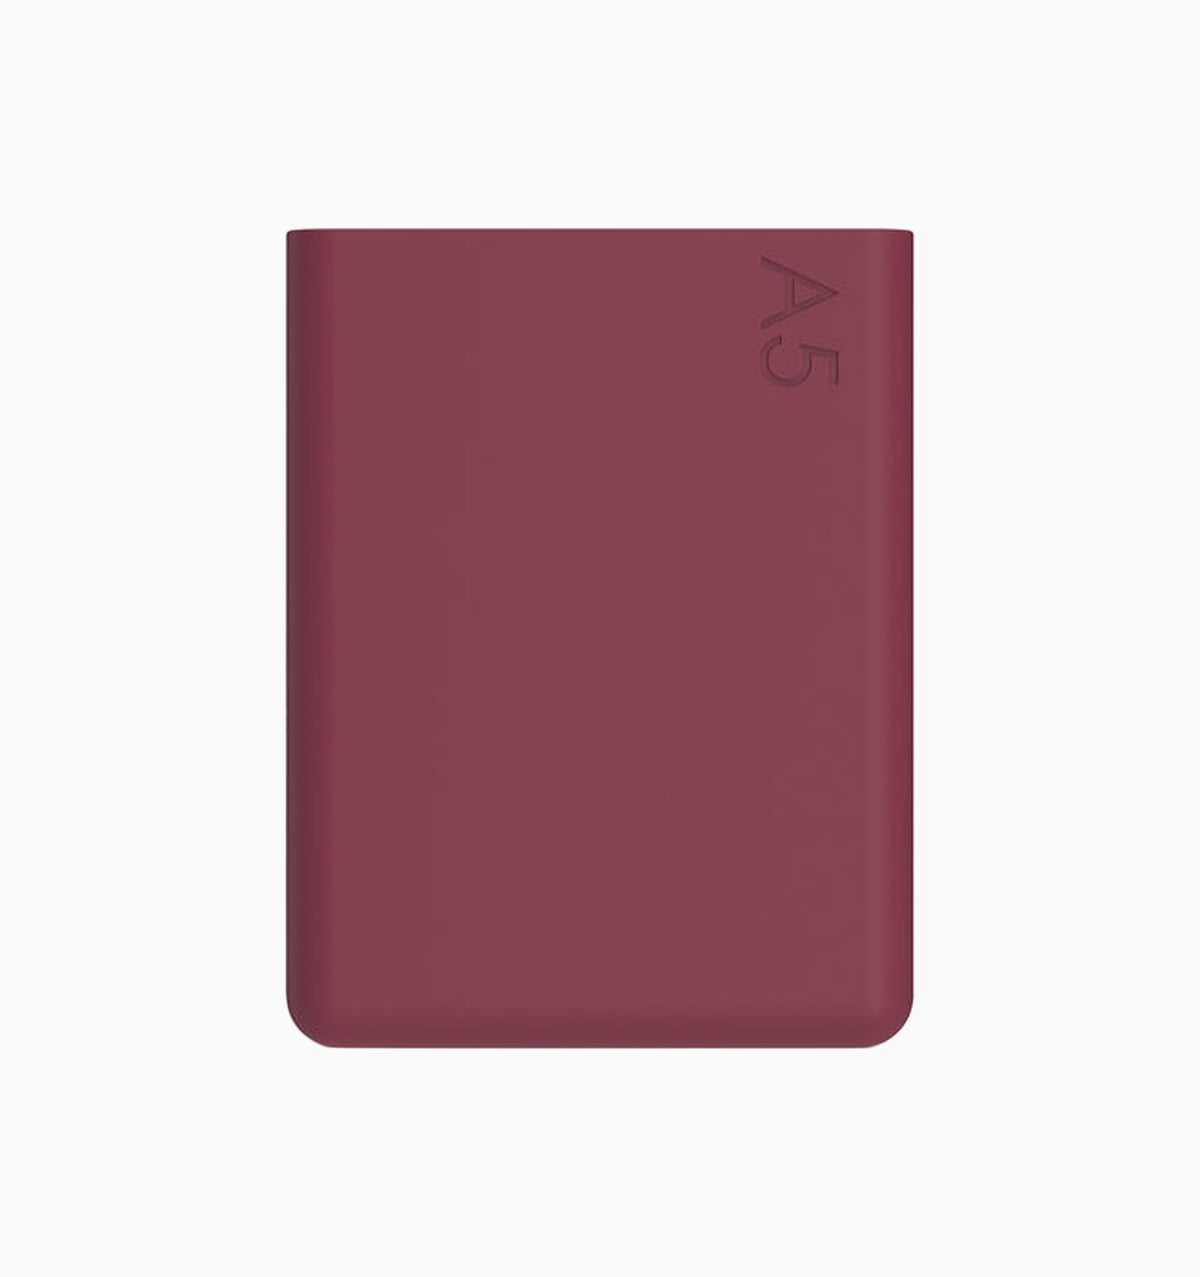 Memobottle A5 Silicone Sleeve - Wild Plum